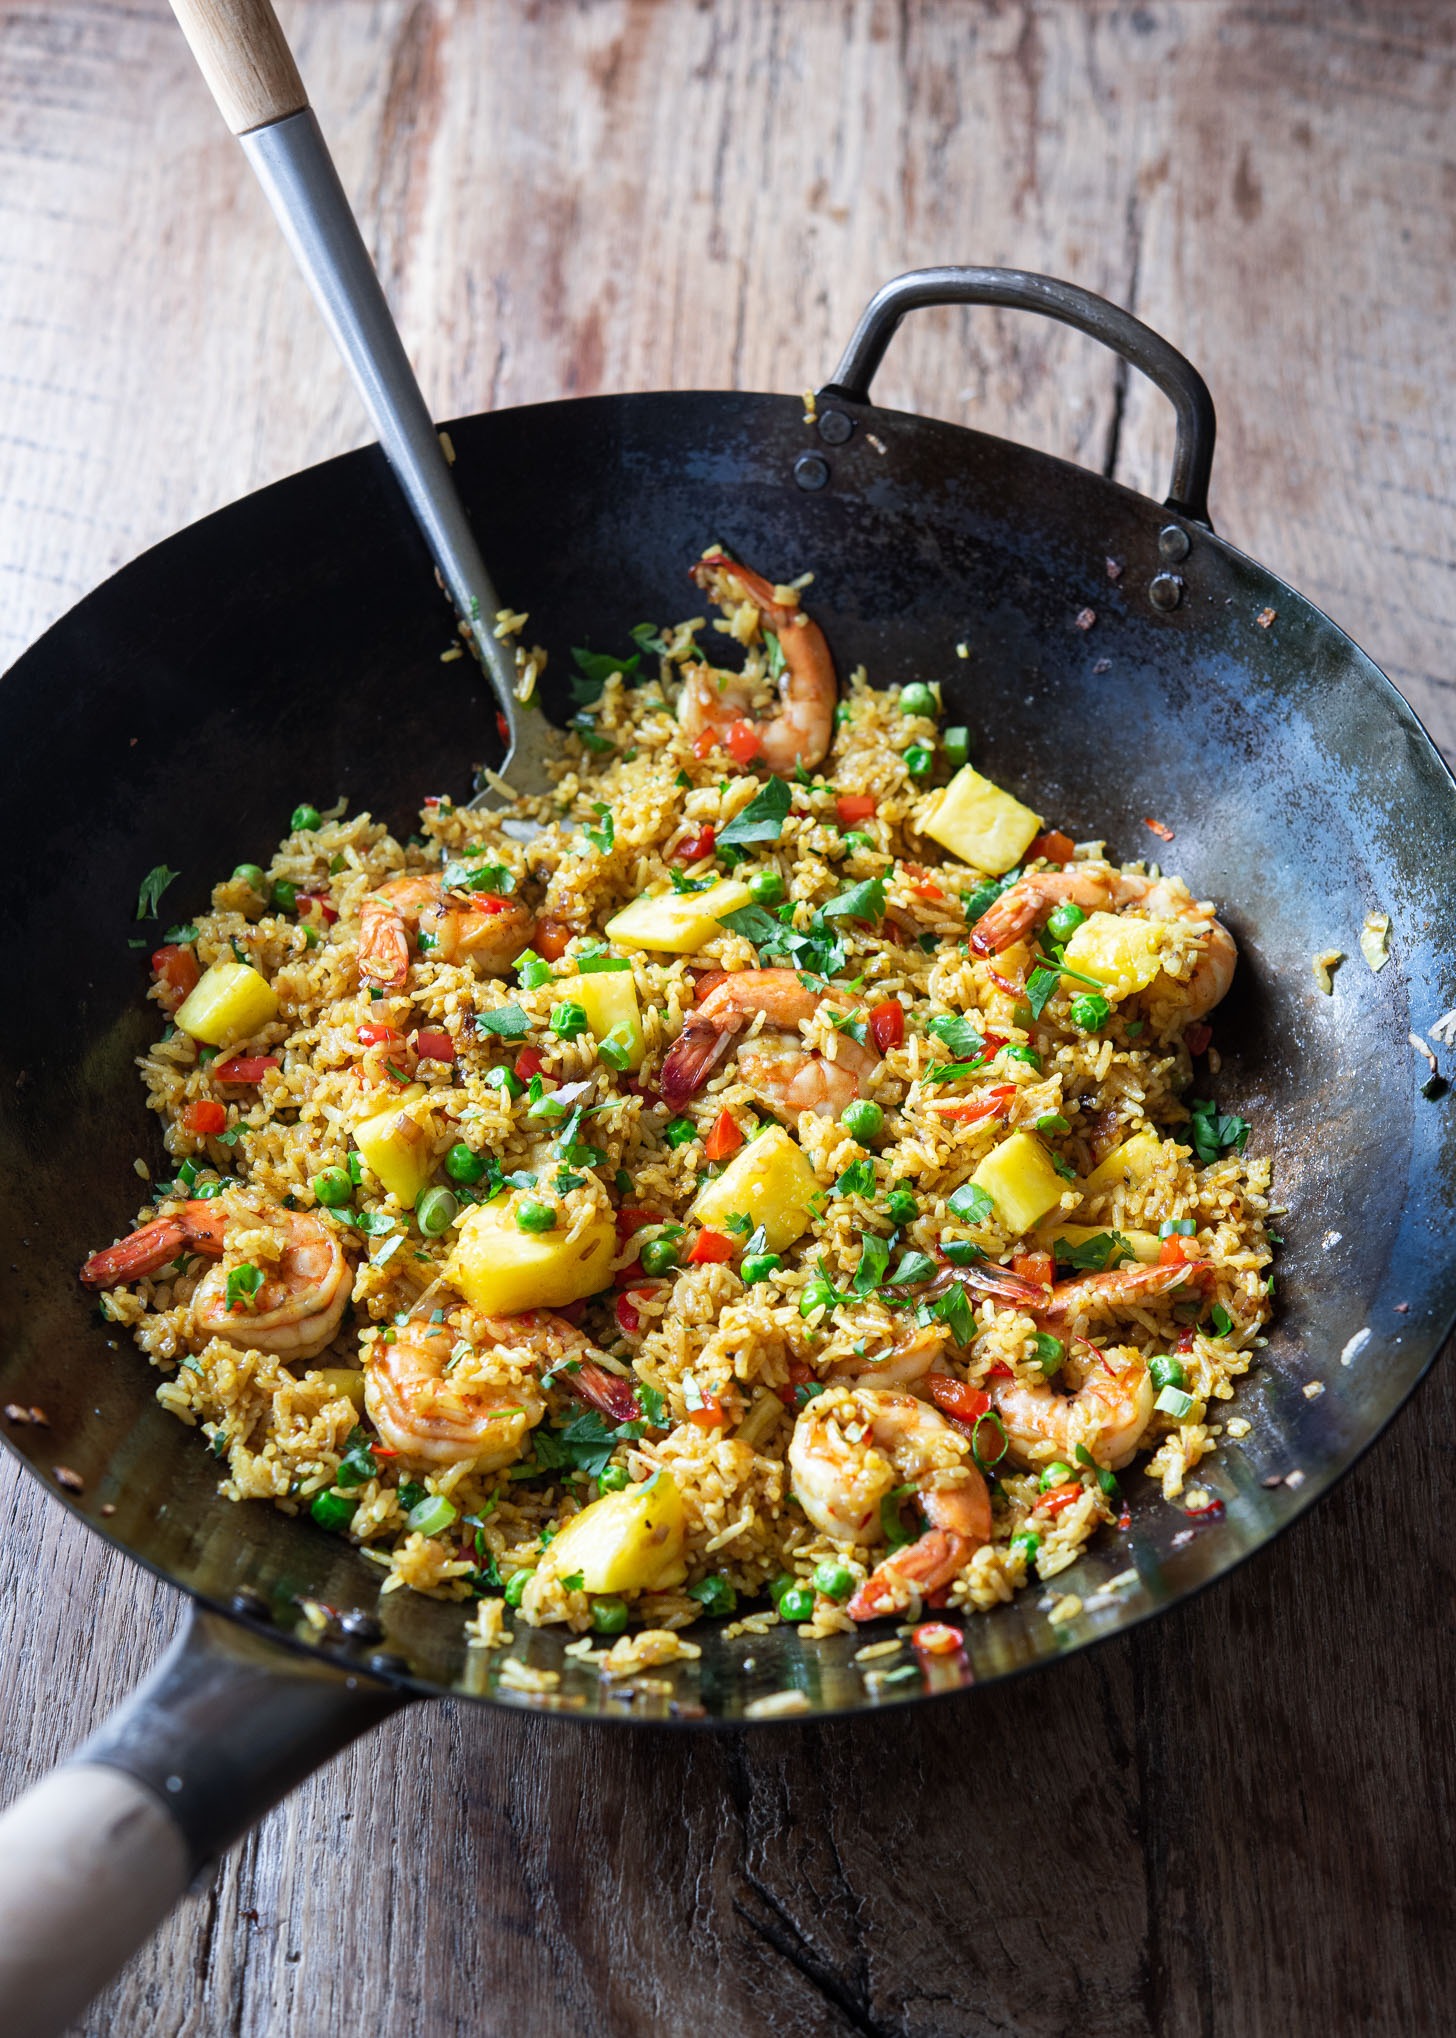 Thai style pineapple fried rice is prepared in a large wok.